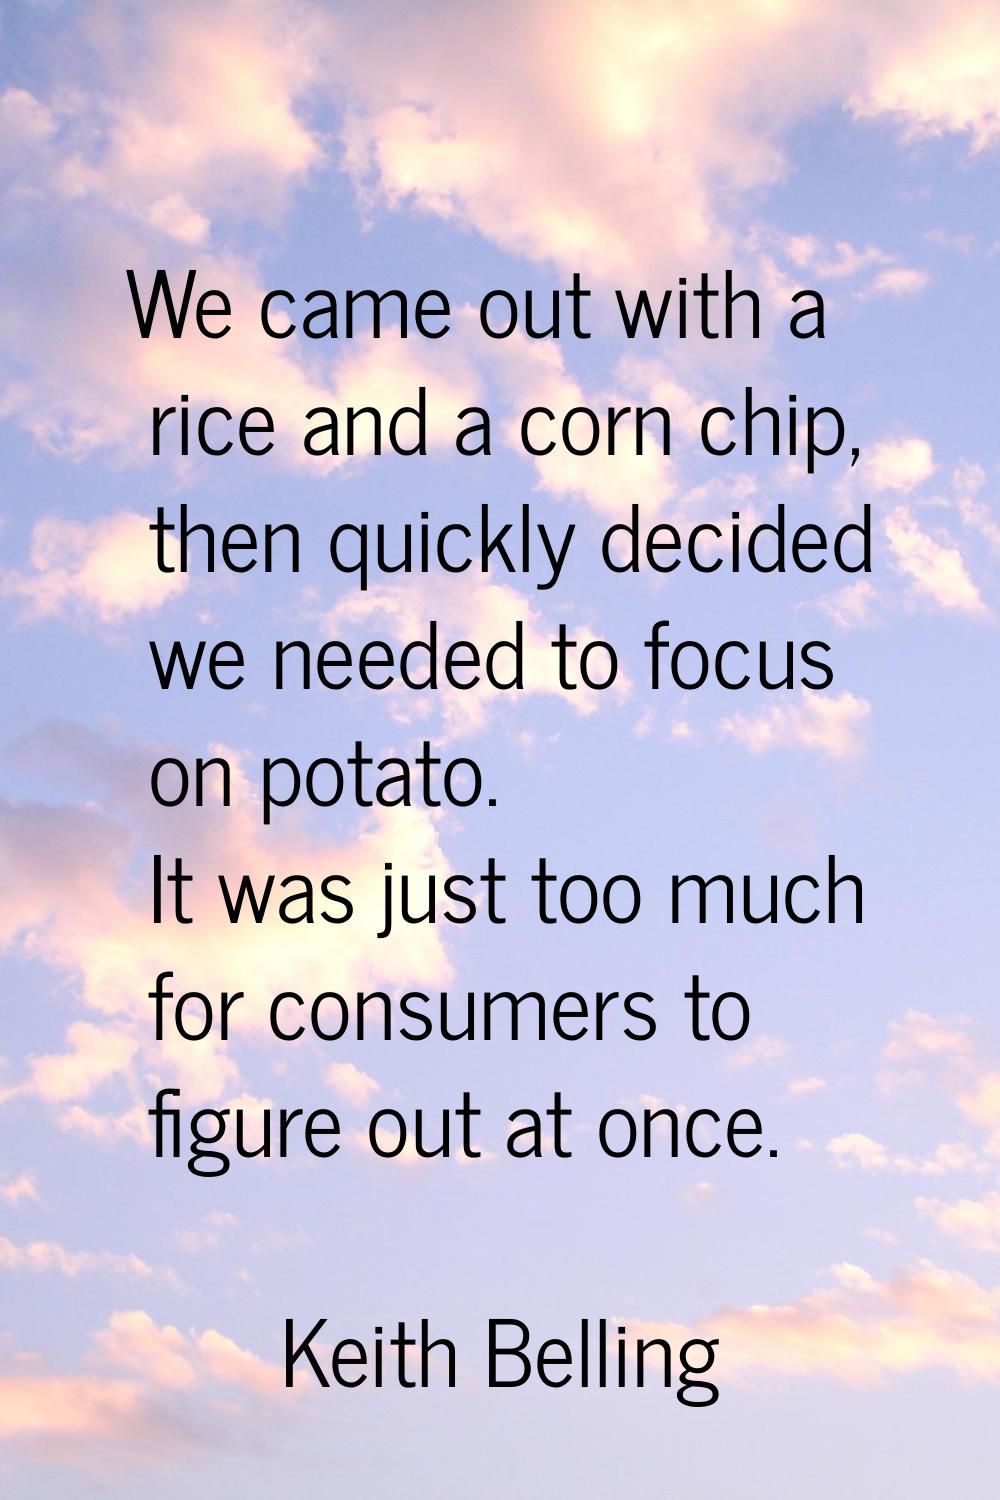 We came out with a rice and a corn chip, then quickly decided we needed to focus on potato. It was 